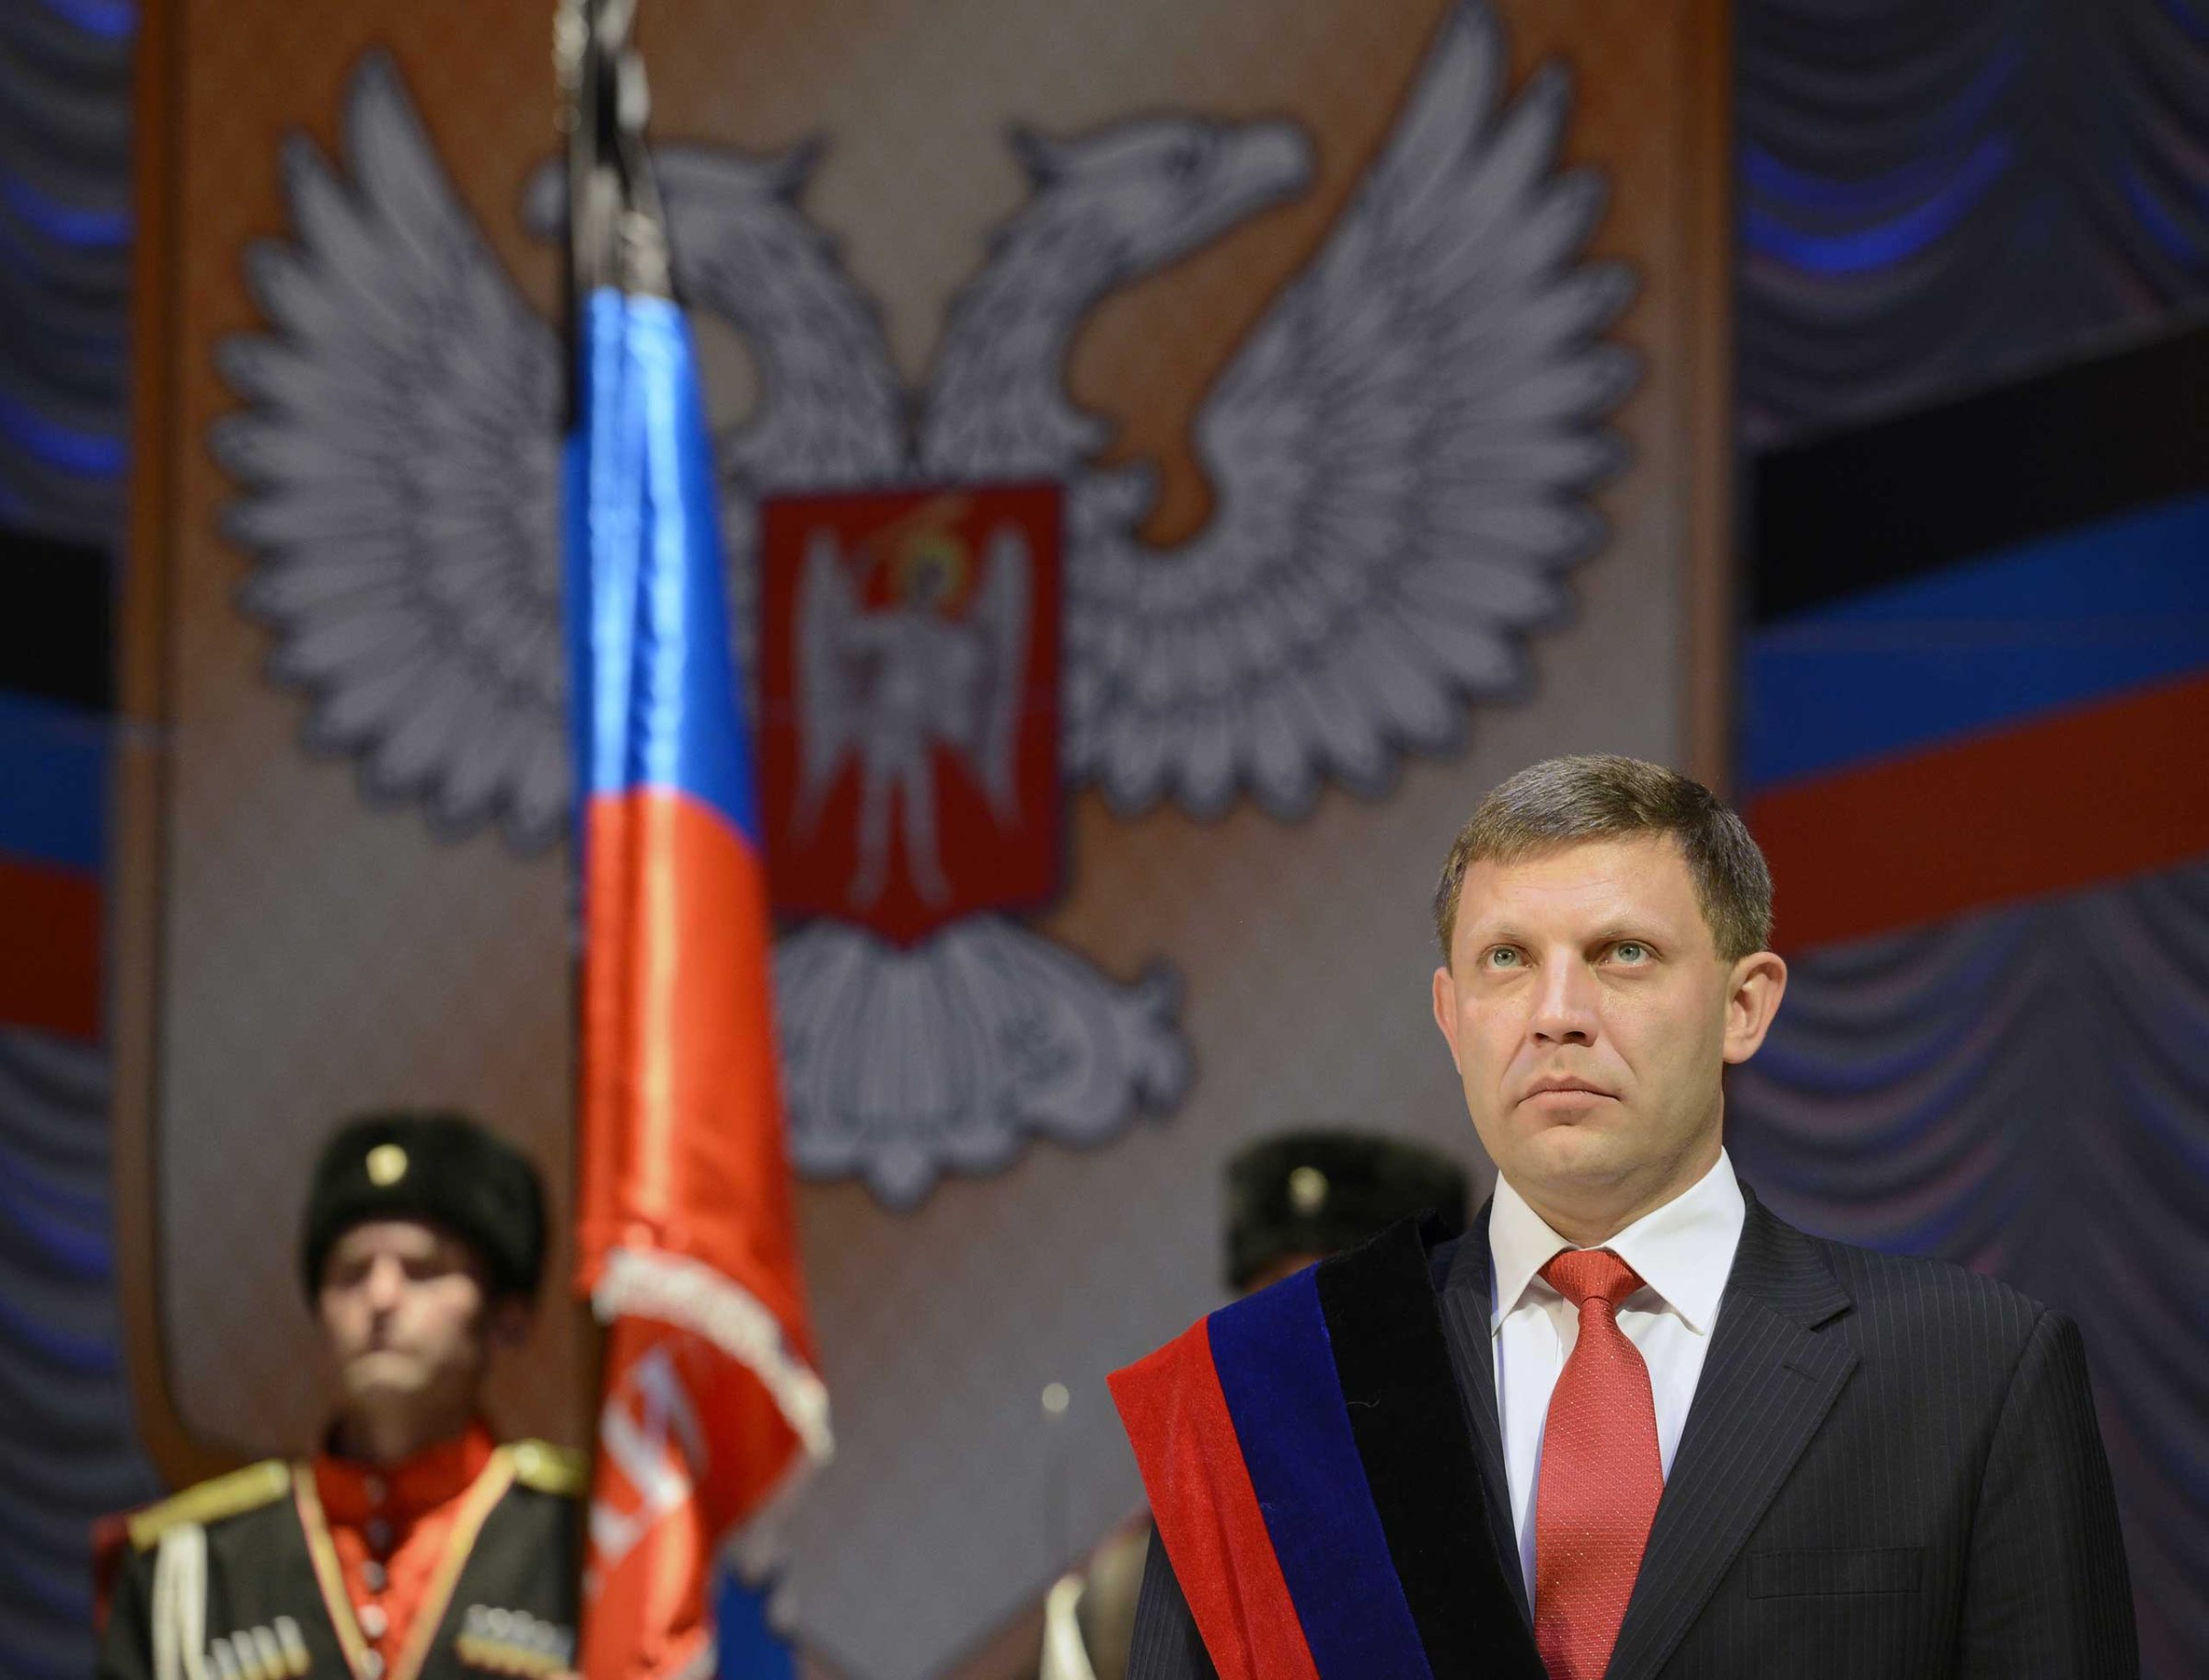 The newly elected leader of the self-proclaimed Donetsk People's Republic, Alexander Zakharchenko, takes the oath on Nov. 4, 2014 during an inauguration ceremony in the eastern Ukrainian city of Donetsk.